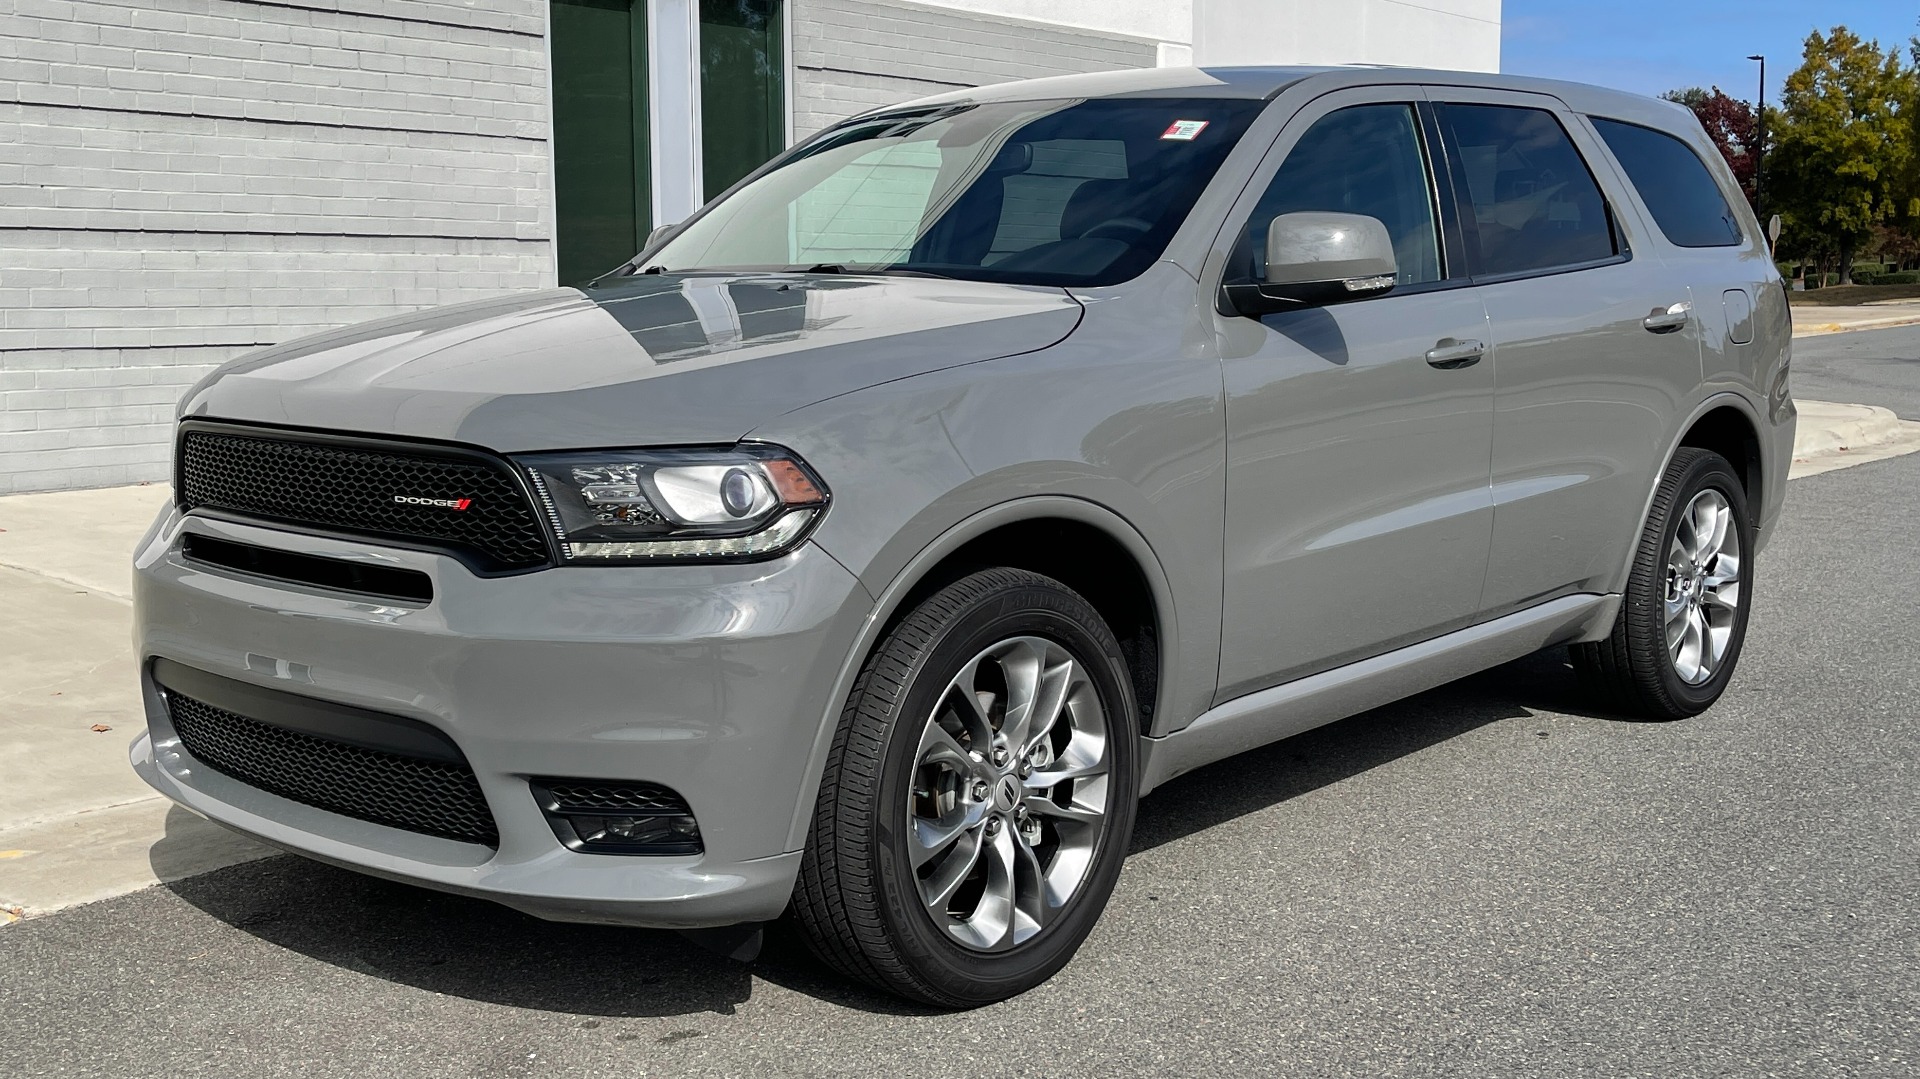 Used 2020 Dodge DURANGO GT PLUS AWD 3.6L / 8-SPD AUTO / ALPINE / 3-ROW / REARVIEW for sale $40,695 at Formula Imports in Charlotte NC 28227 2